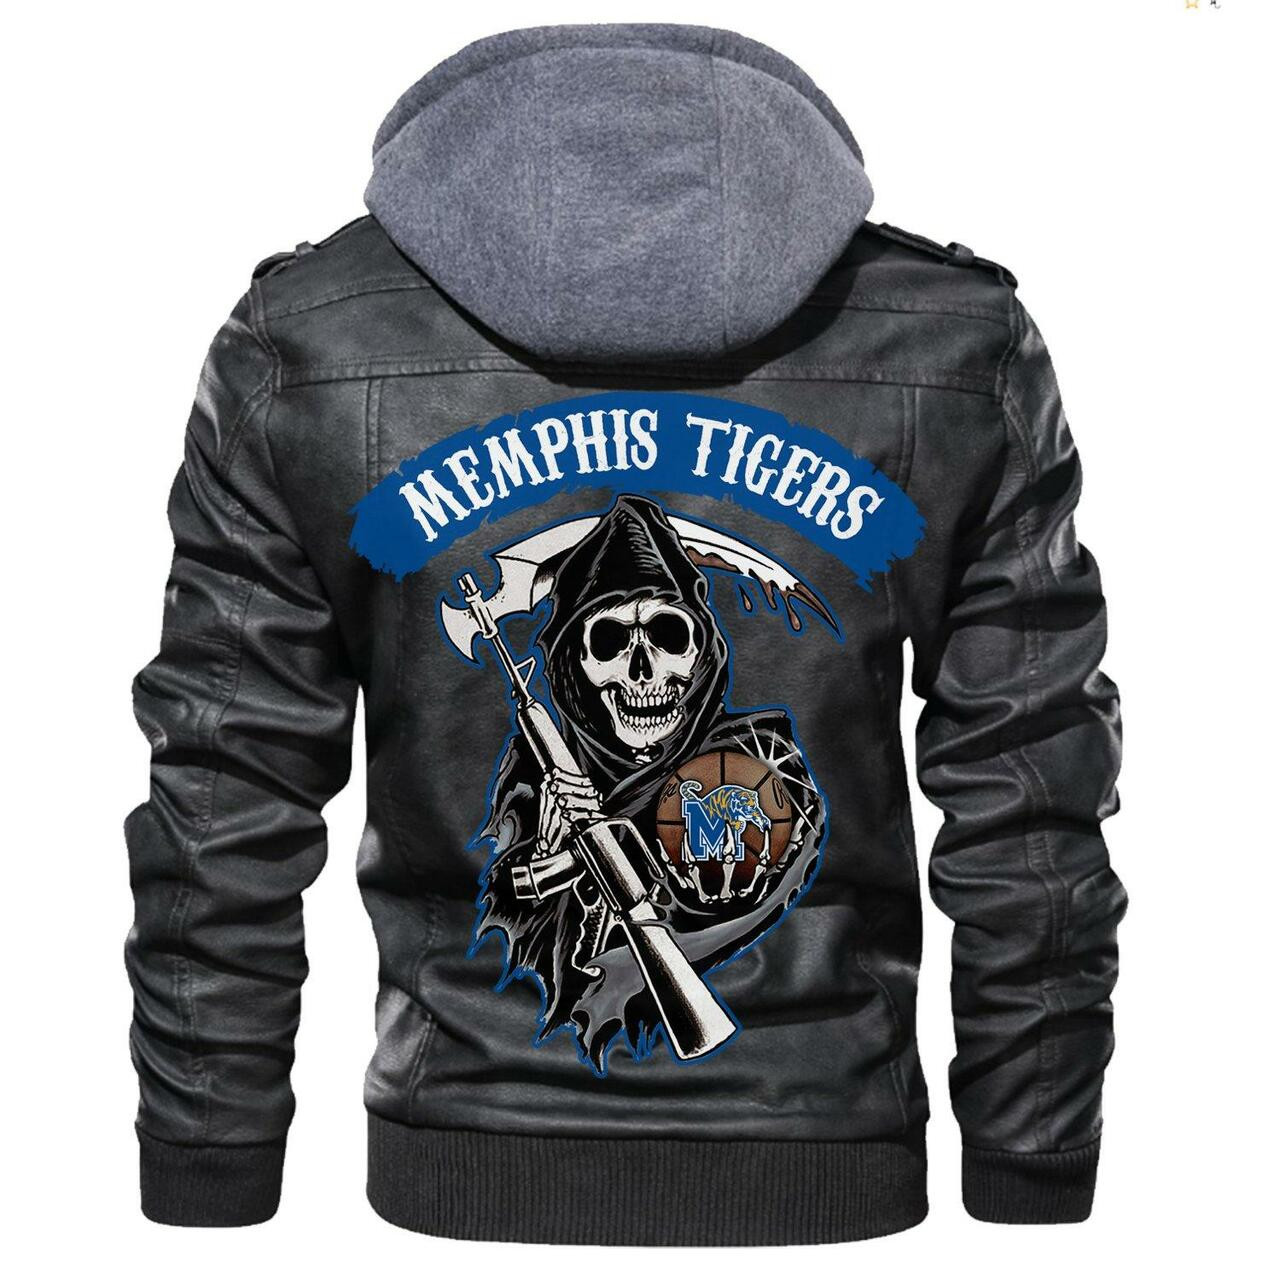 Check out and find the right leather jacket below 42